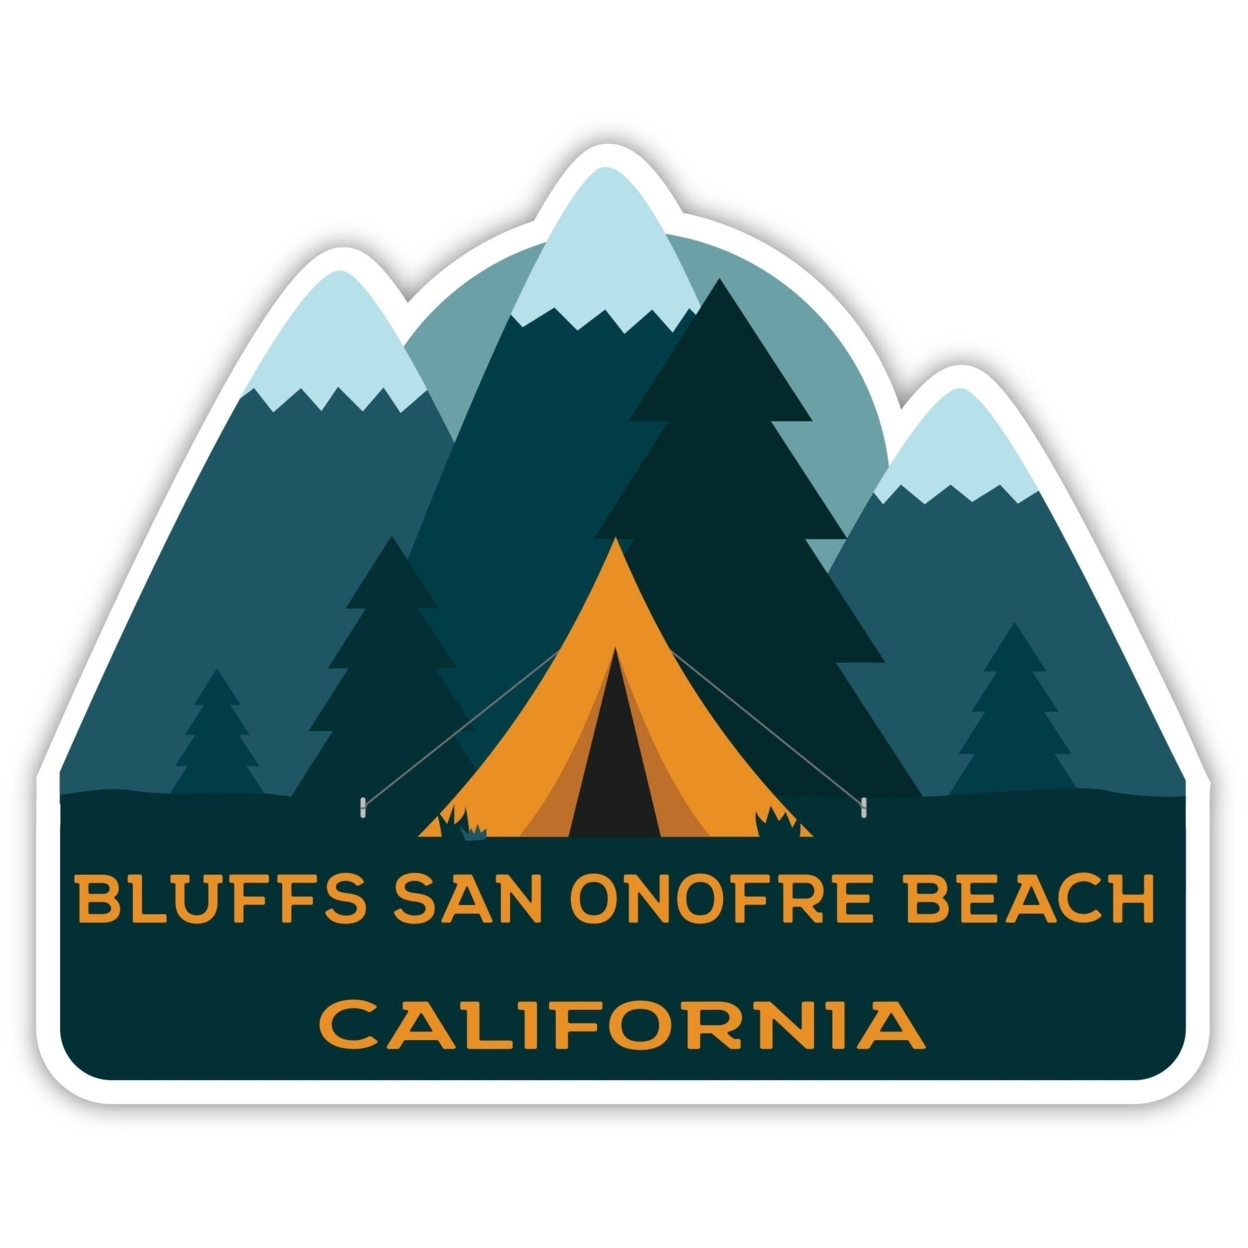 Bluffs San Onofre Beach California Souvenir Decorative Stickers (Choose Theme And Size) - 4-Pack, 2-Inch, Adventures Awaits